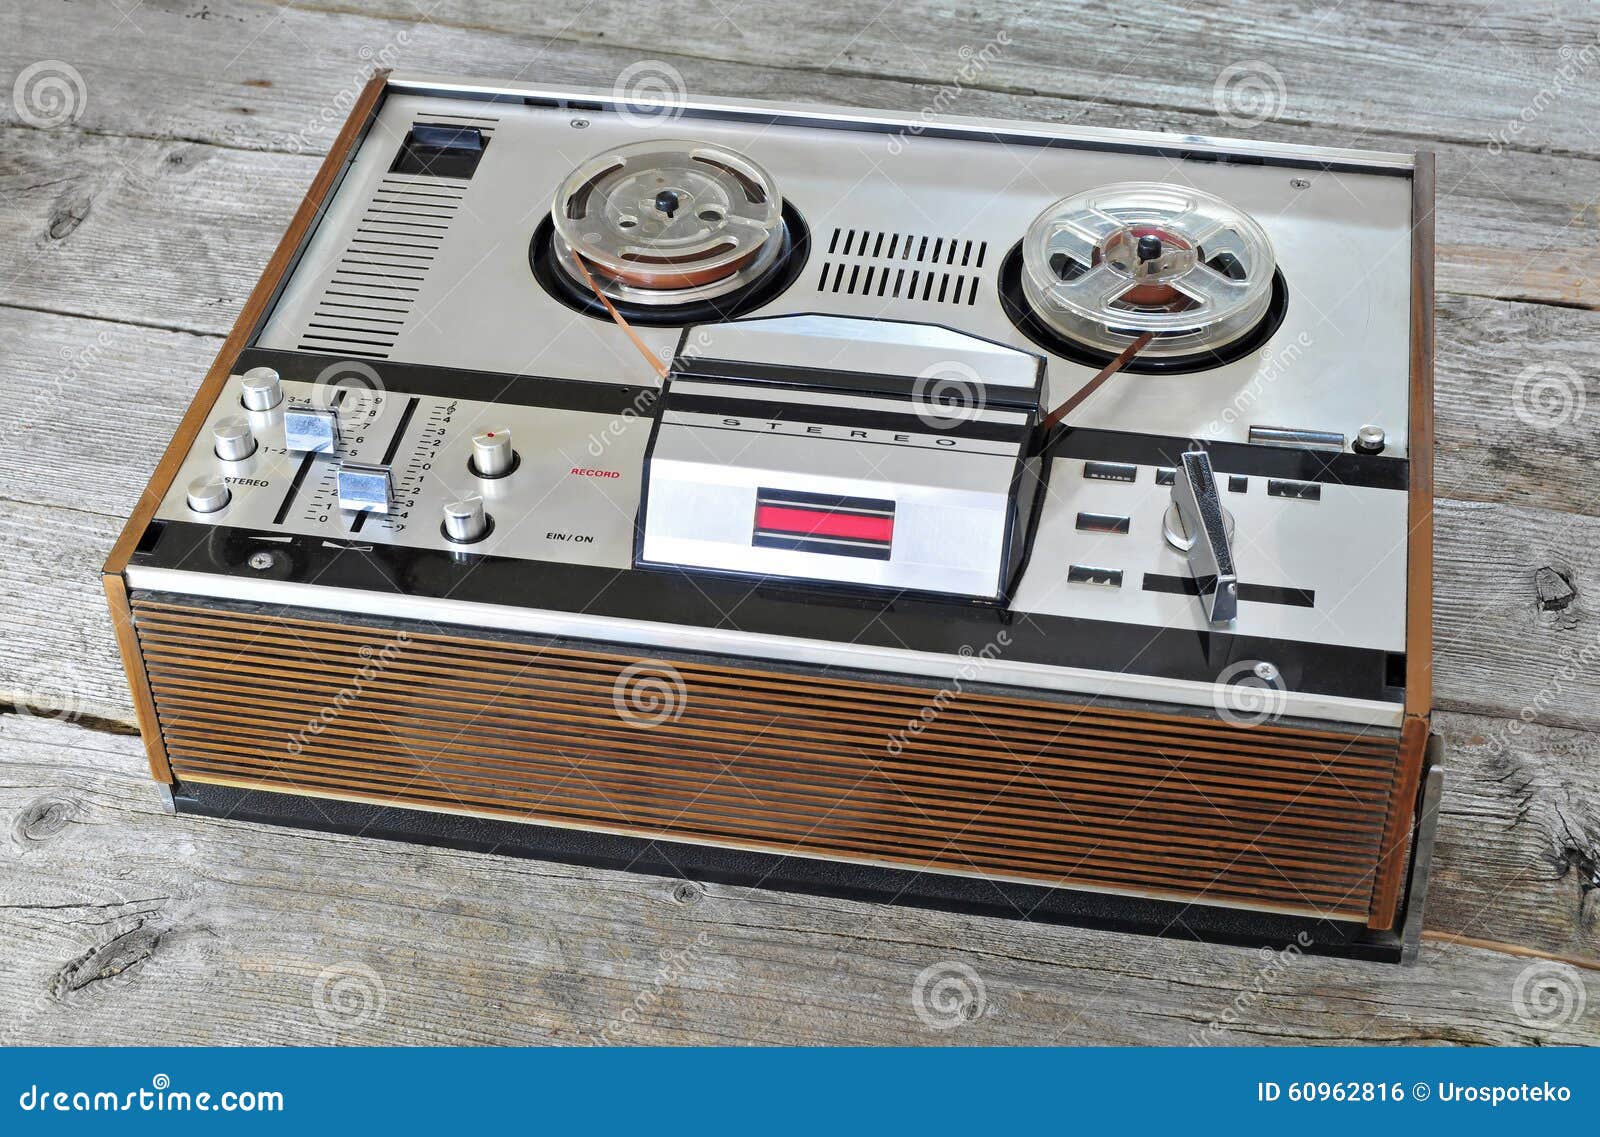 Old Reel To Reel Tape Recorder and Player Stock Photo - Image of